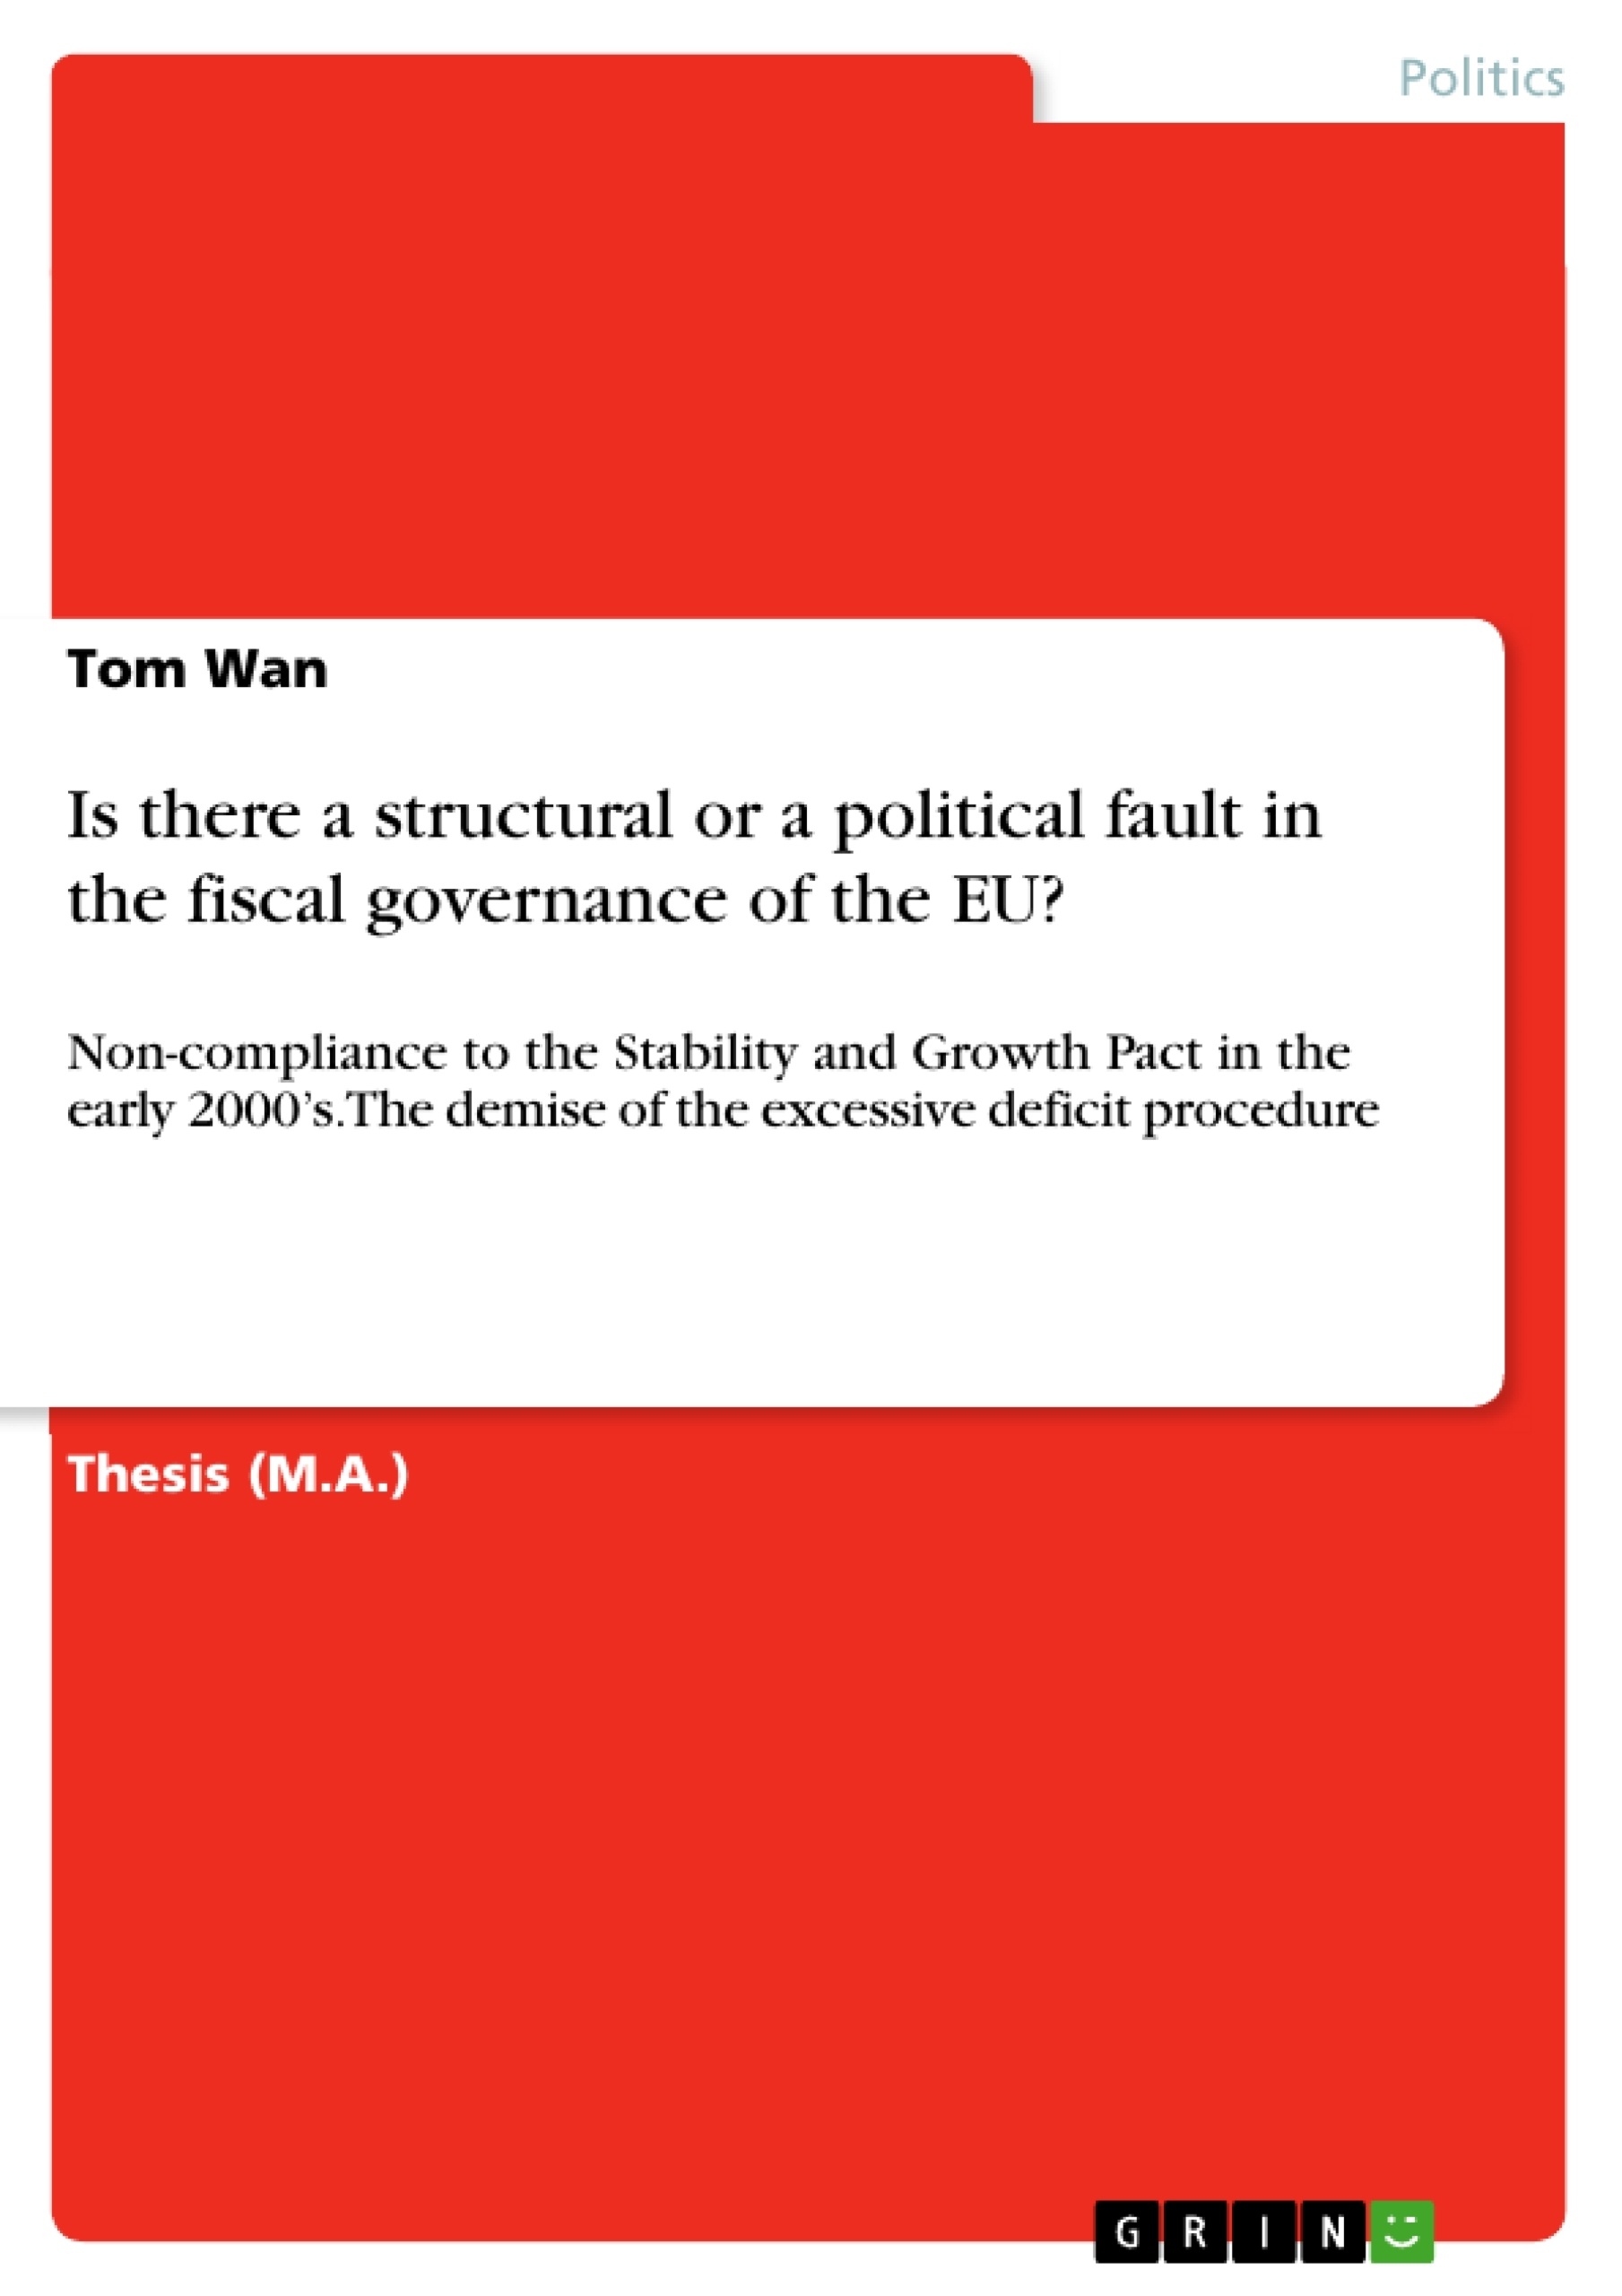 Titre: Is there a structural or a political fault in the fiscal governance of the EU?